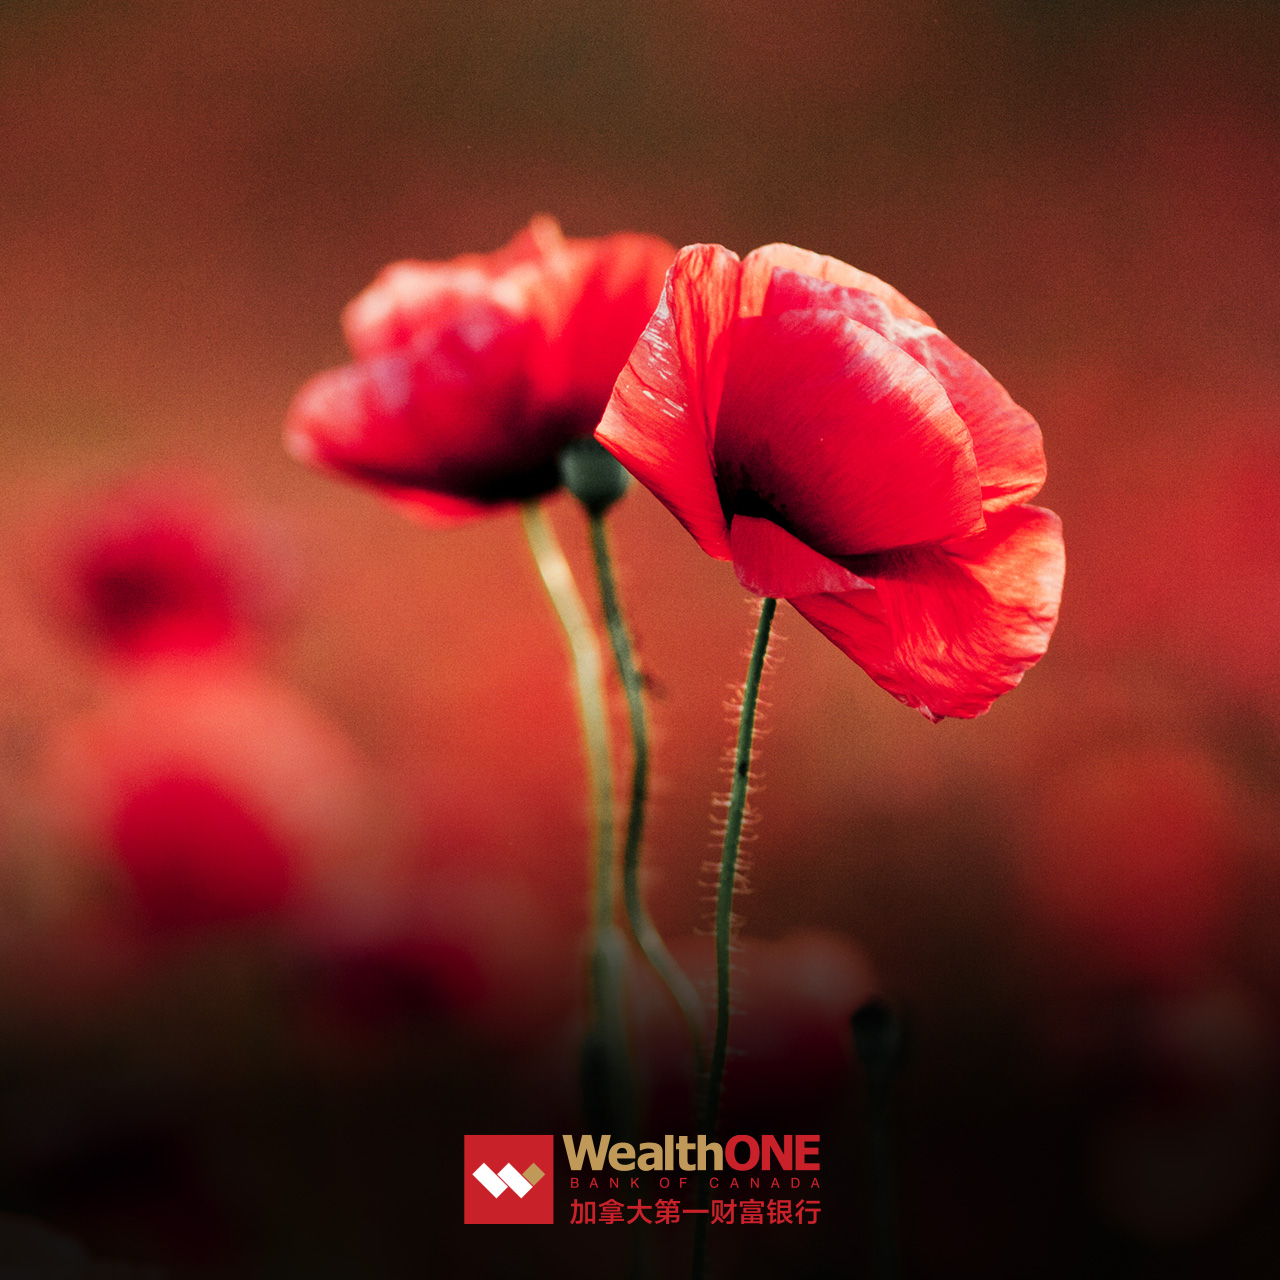 Two poppy flowers and a logo of WealthONE bank